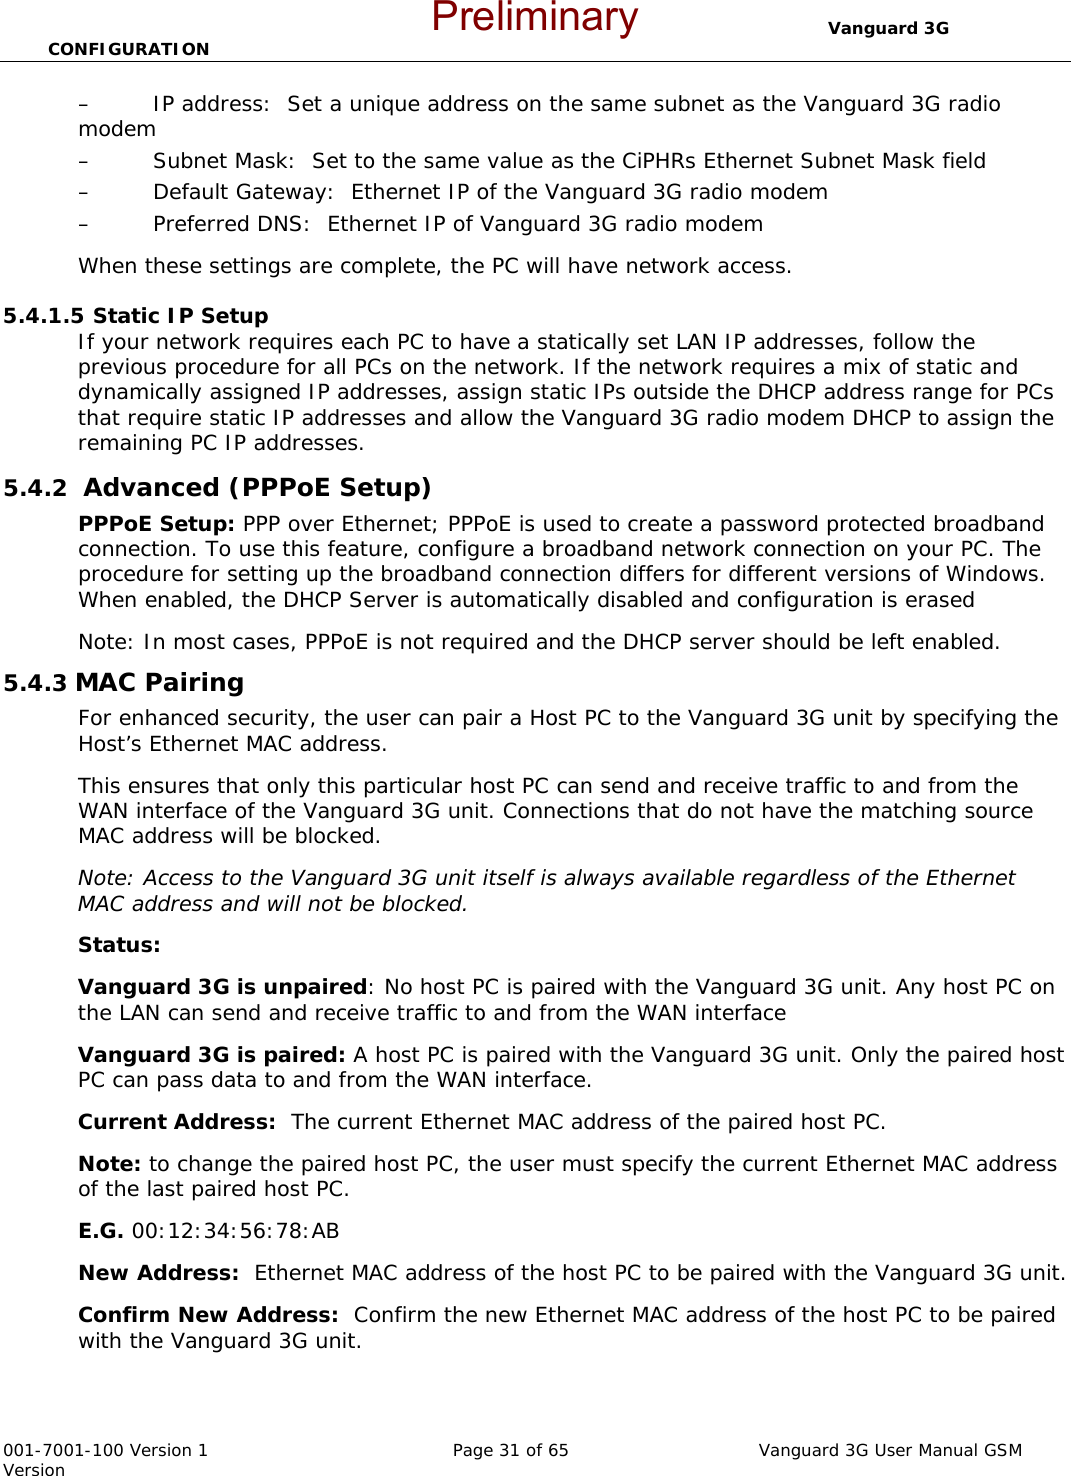                                  Vanguard 3G CONFIGURATION  001-7001-100 Version 1       Page 31 of 65       Vanguard 3G User Manual GSM Version – IP address:  Set a unique address on the same subnet as the Vanguard 3G radio modem – Subnet Mask:  Set to the same value as the CiPHRs Ethernet Subnet Mask field – Default Gateway:  Ethernet IP of the Vanguard 3G radio modem – Preferred DNS:  Ethernet IP of Vanguard 3G radio modem When these settings are complete, the PC will have network access.    5.4.1.5 Static IP Setup If your network requires each PC to have a statically set LAN IP addresses, follow the previous procedure for all PCs on the network. If the network requires a mix of static and dynamically assigned IP addresses, assign static IPs outside the DHCP address range for PCs that require static IP addresses and allow the Vanguard 3G radio modem DHCP to assign the remaining PC IP addresses. 5.4.2  Advanced (PPPoE Setup) PPPoE Setup: PPP over Ethernet; PPPoE is used to create a password protected broadband connection. To use this feature, configure a broadband network connection on your PC. The procedure for setting up the broadband connection differs for different versions of Windows. When enabled, the DHCP Server is automatically disabled and configuration is erased  Note: In most cases, PPPoE is not required and the DHCP server should be left enabled.  5.4.3 MAC Pairing  For enhanced security, the user can pair a Host PC to the Vanguard 3G unit by specifying the Host’s Ethernet MAC address.  This ensures that only this particular host PC can send and receive traffic to and from the WAN interface of the Vanguard 3G unit. Connections that do not have the matching source MAC address will be blocked.   Note: Access to the Vanguard 3G unit itself is always available regardless of the Ethernet MAC address and will not be blocked. Status:   Vanguard 3G is unpaired: No host PC is paired with the Vanguard 3G unit. Any host PC on the LAN can send and receive traffic to and from the WAN interface Vanguard 3G is paired: A host PC is paired with the Vanguard 3G unit. Only the paired host PC can pass data to and from the WAN interface. Current Address:  The current Ethernet MAC address of the paired host PC.  Note: to change the paired host PC, the user must specify the current Ethernet MAC address of the last paired host PC. E.G. 00:12:34:56:78:AB New Address:  Ethernet MAC address of the host PC to be paired with the Vanguard 3G unit. Confirm New Address:  Confirm the new Ethernet MAC address of the host PC to be paired with the Vanguard 3G unit. Preliminary